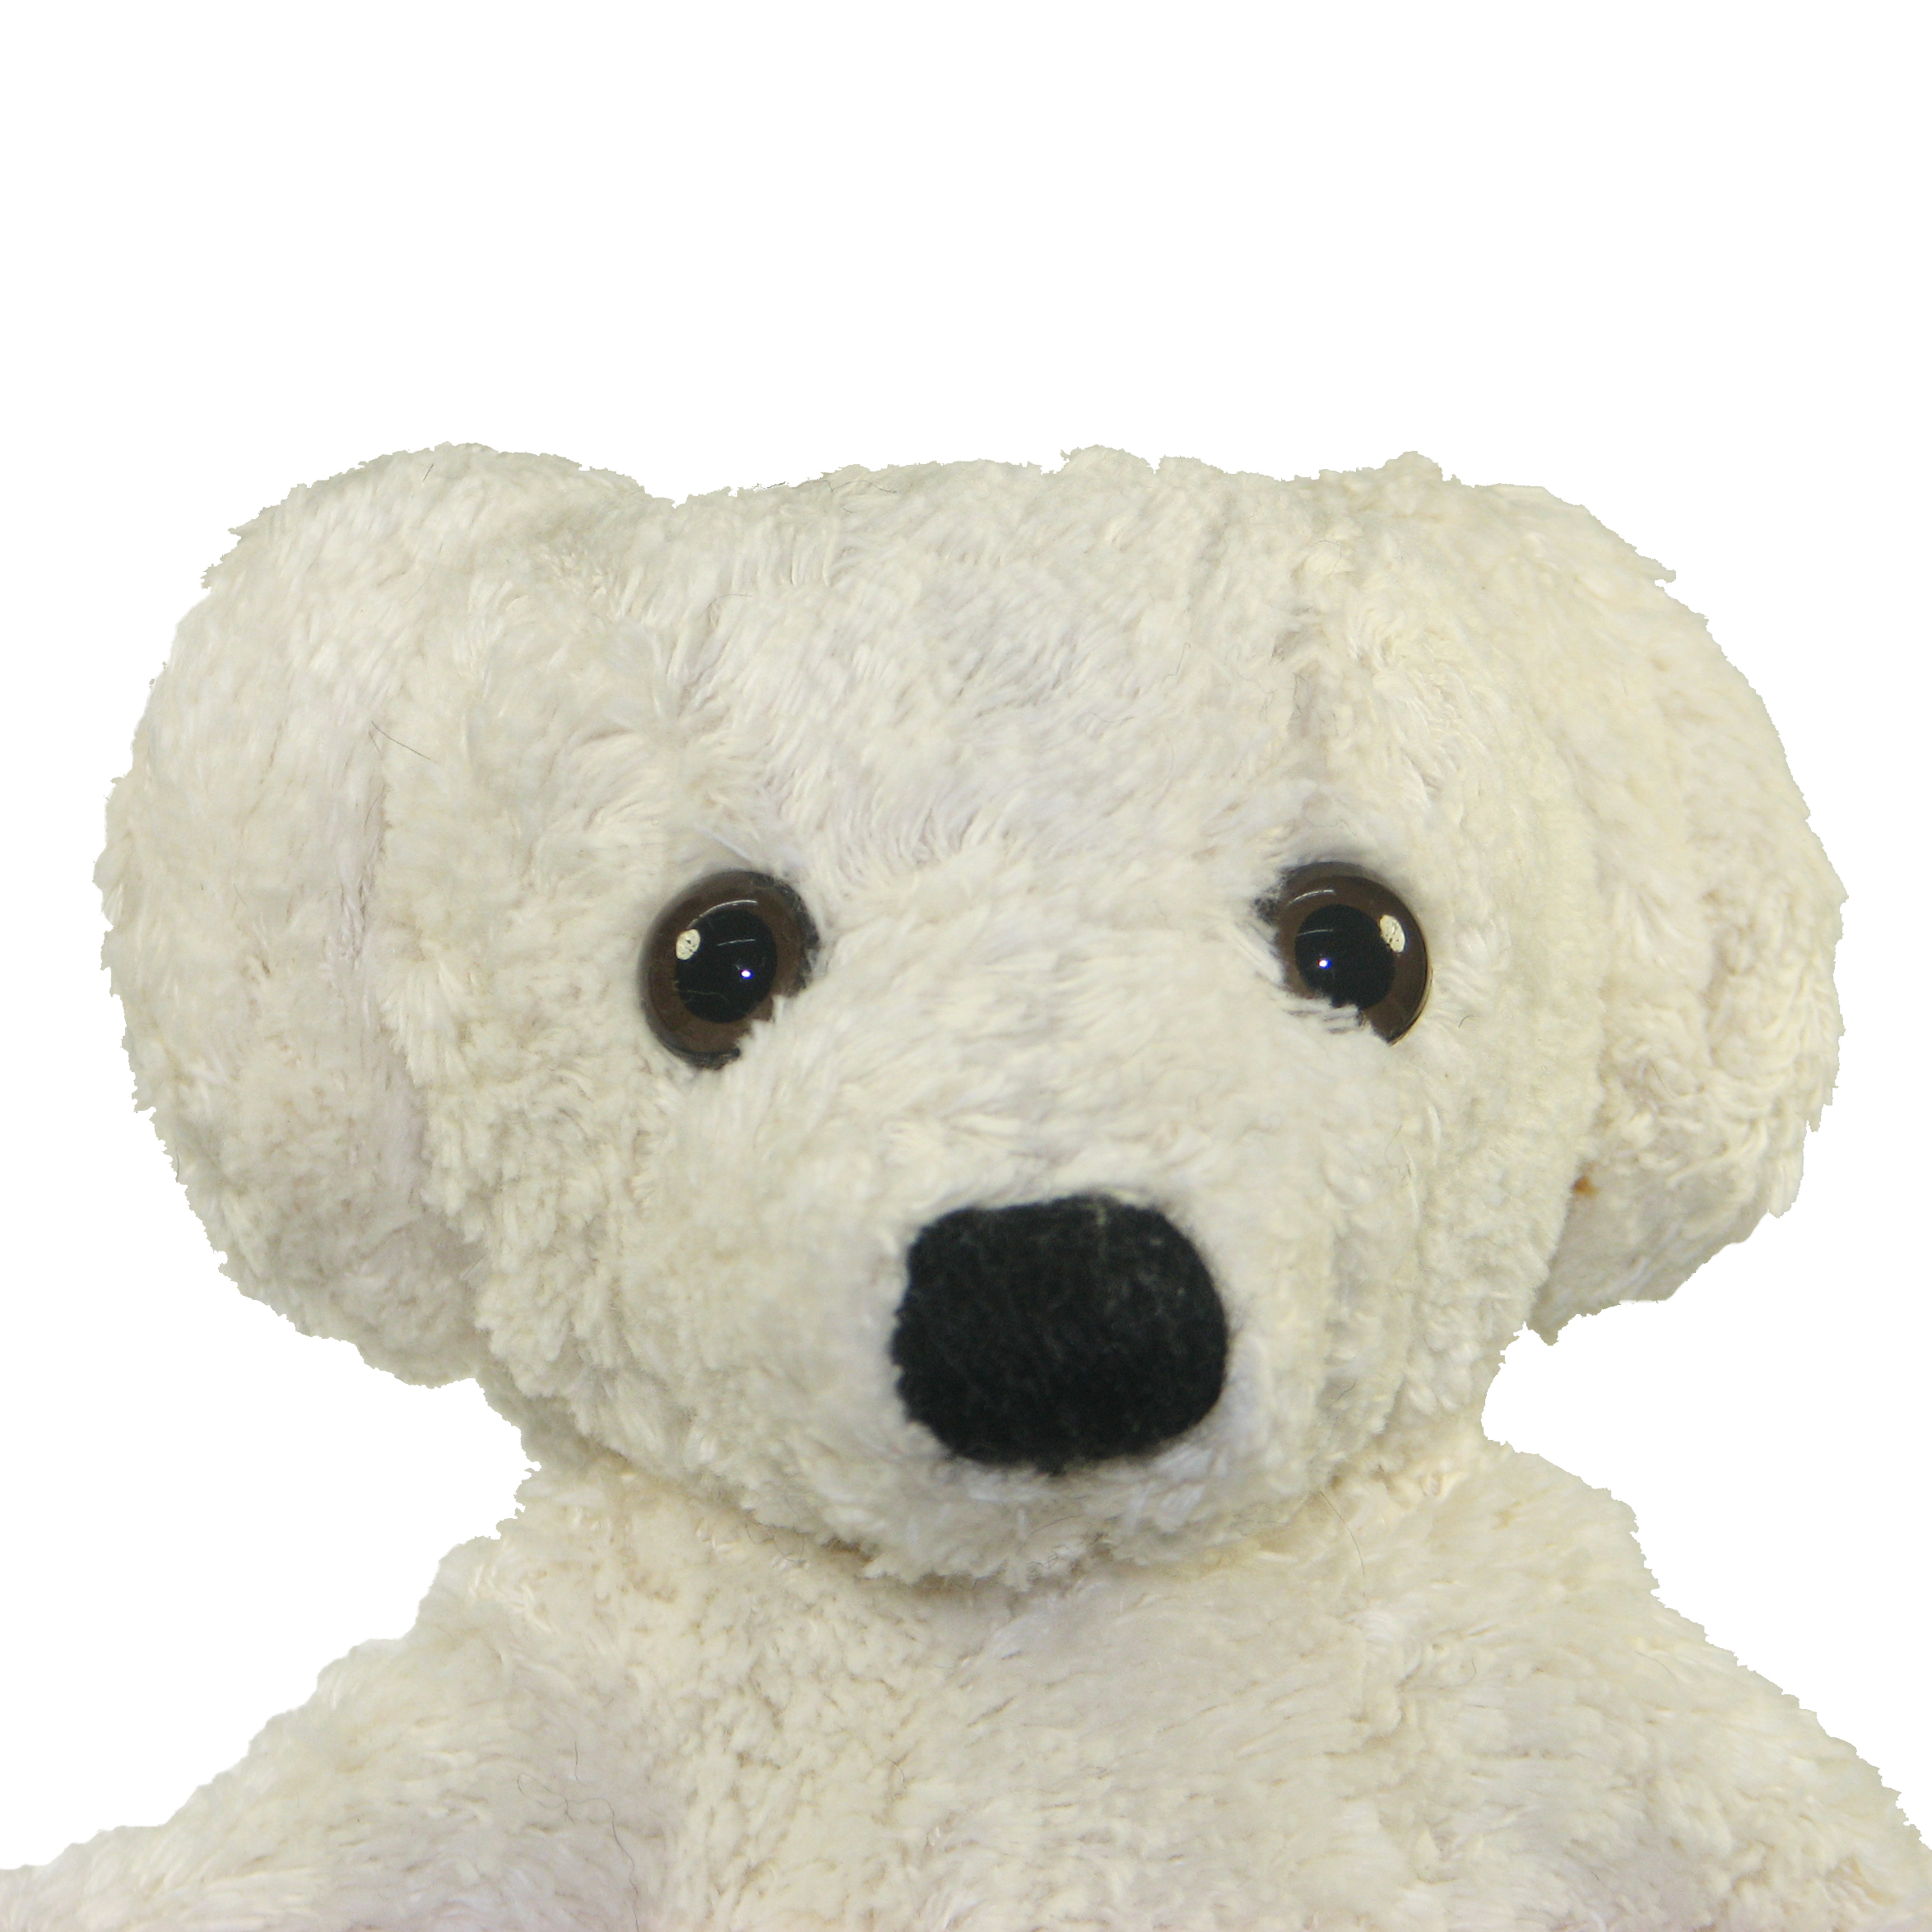 Hand puppet white bear - made of natural material - by Kallisto